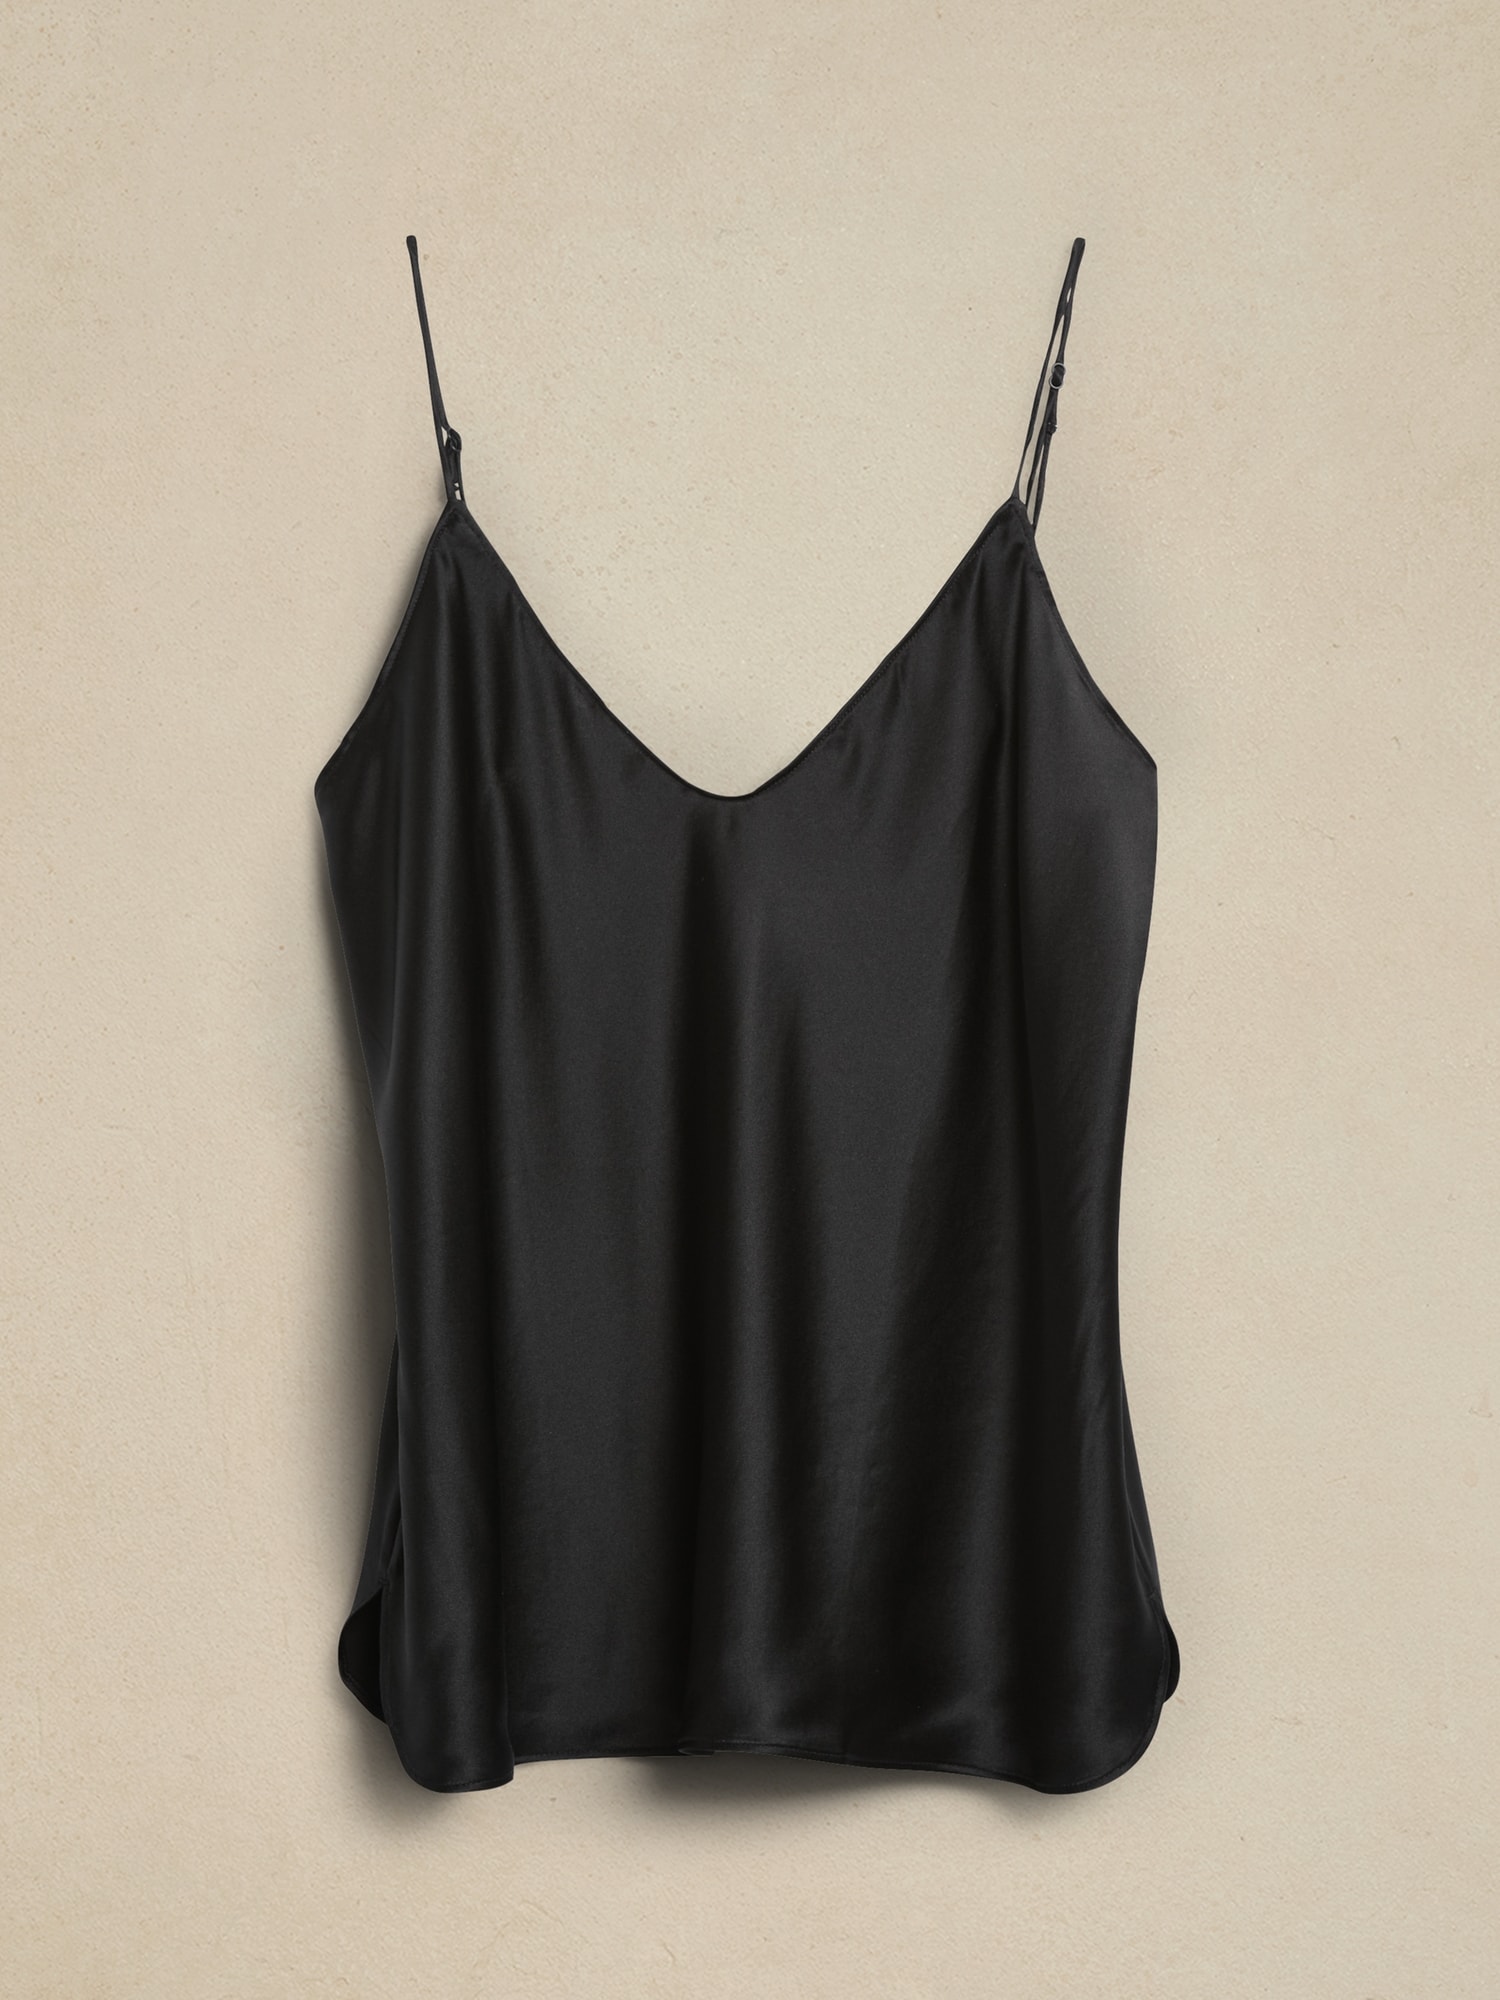 Buy Truly Black Silk Camisole from the Next UK online shop